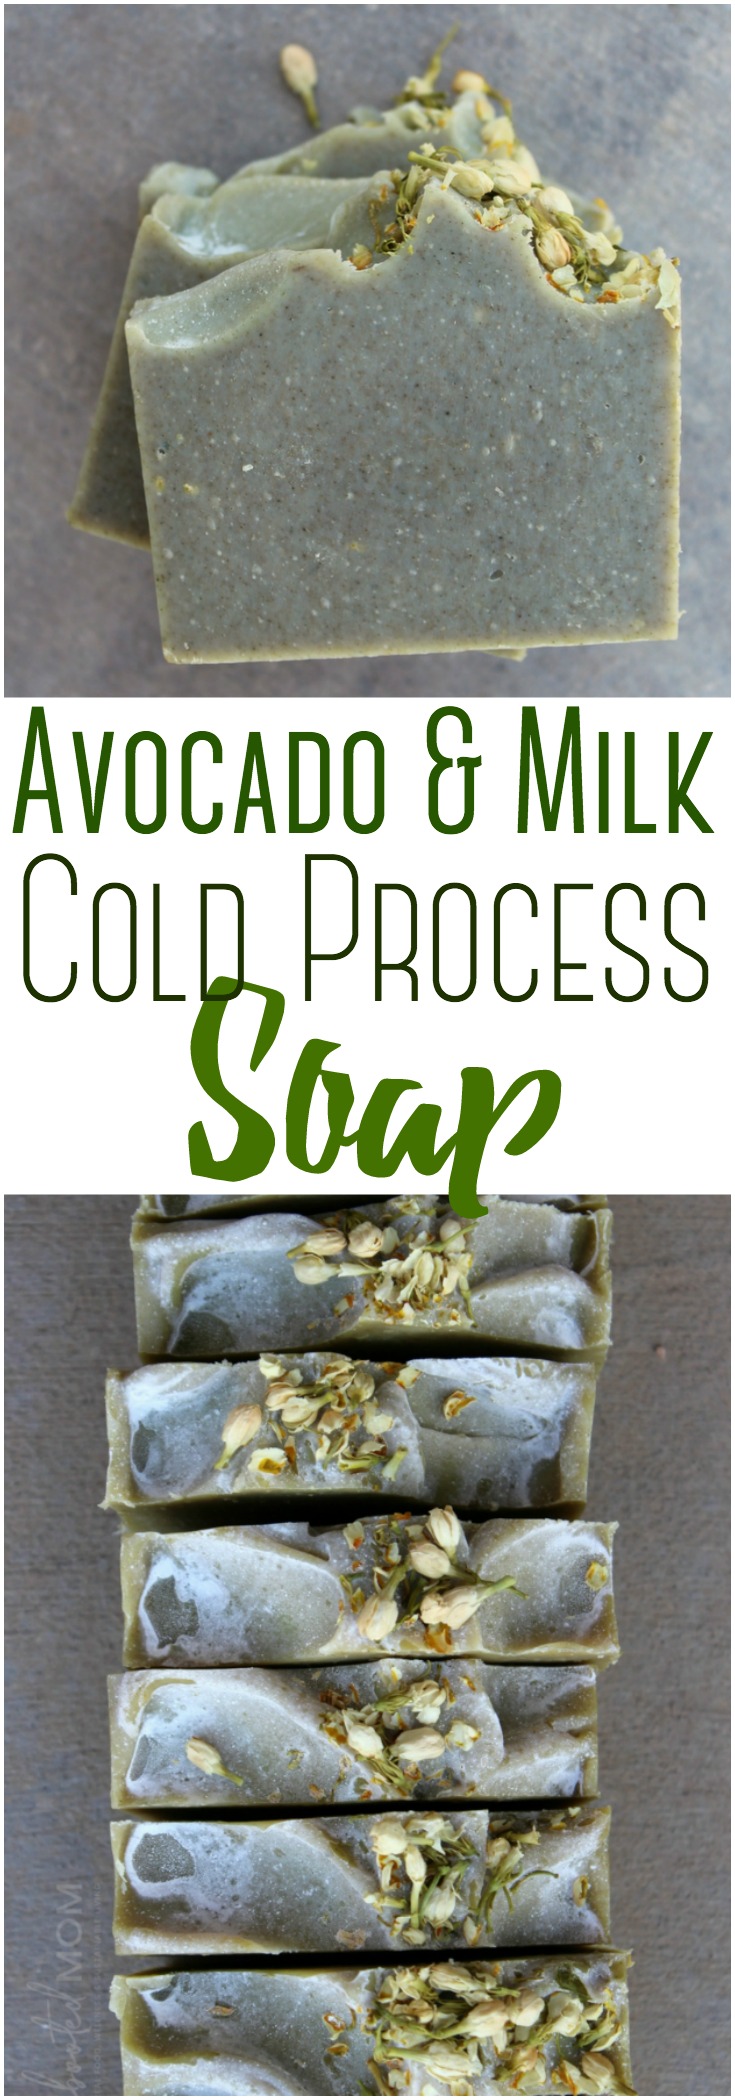 This avocado and milk cold process soap includes a whole, organic avocado and raw milk from grass-fed cows, which are wonderful to nourish and moisturize skin! 